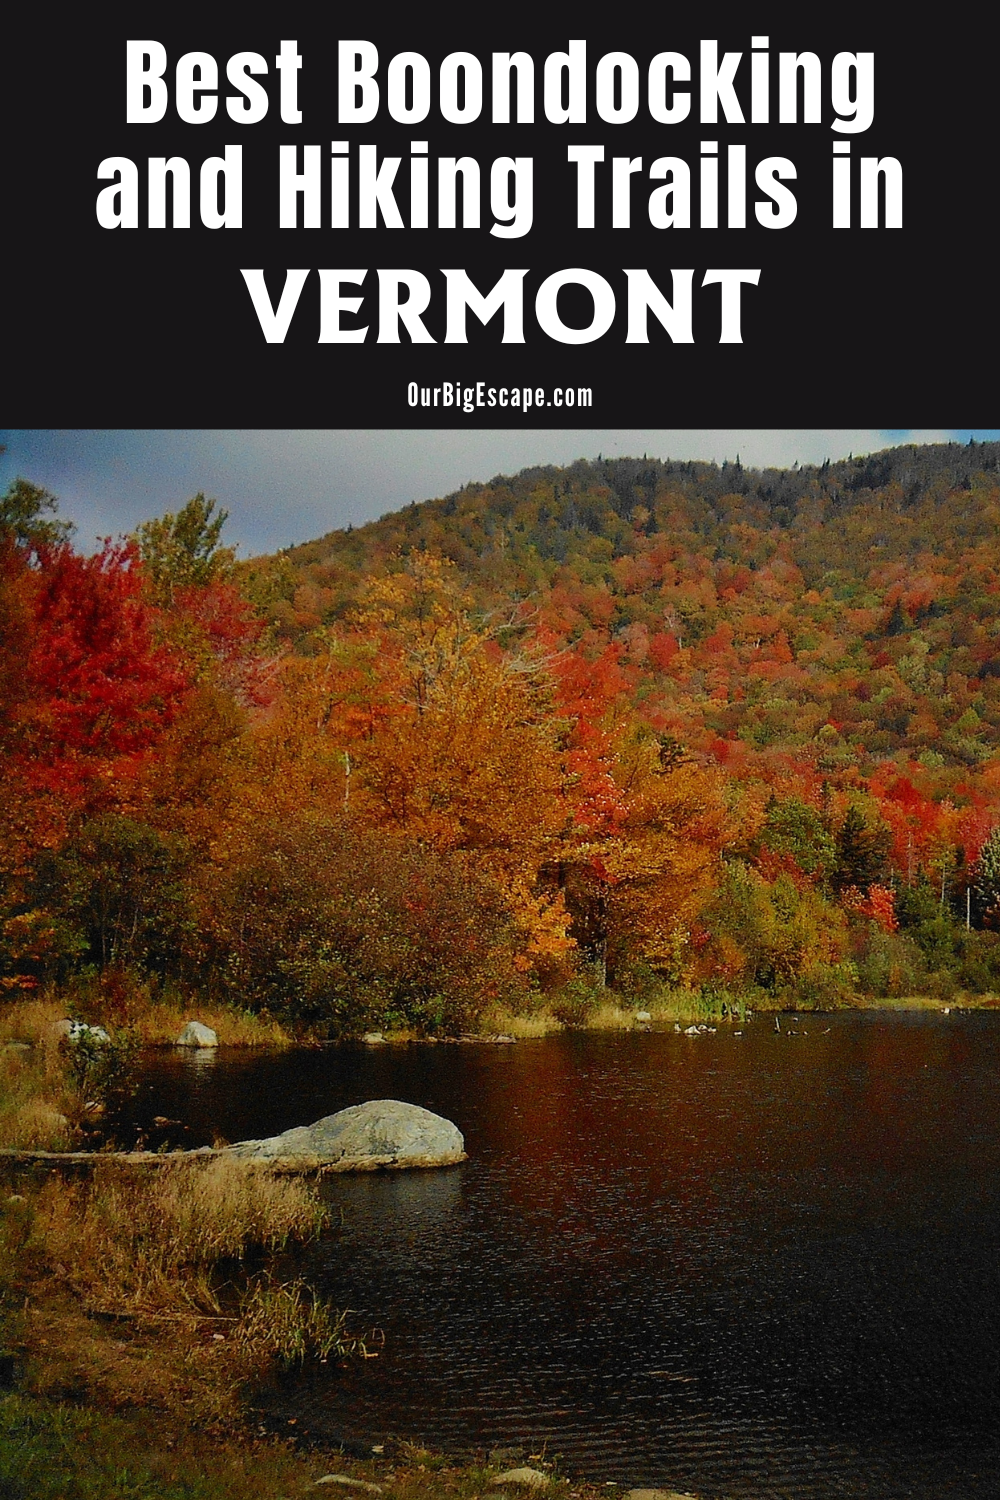 Best Boondocking and Hiking Trails in Vermont